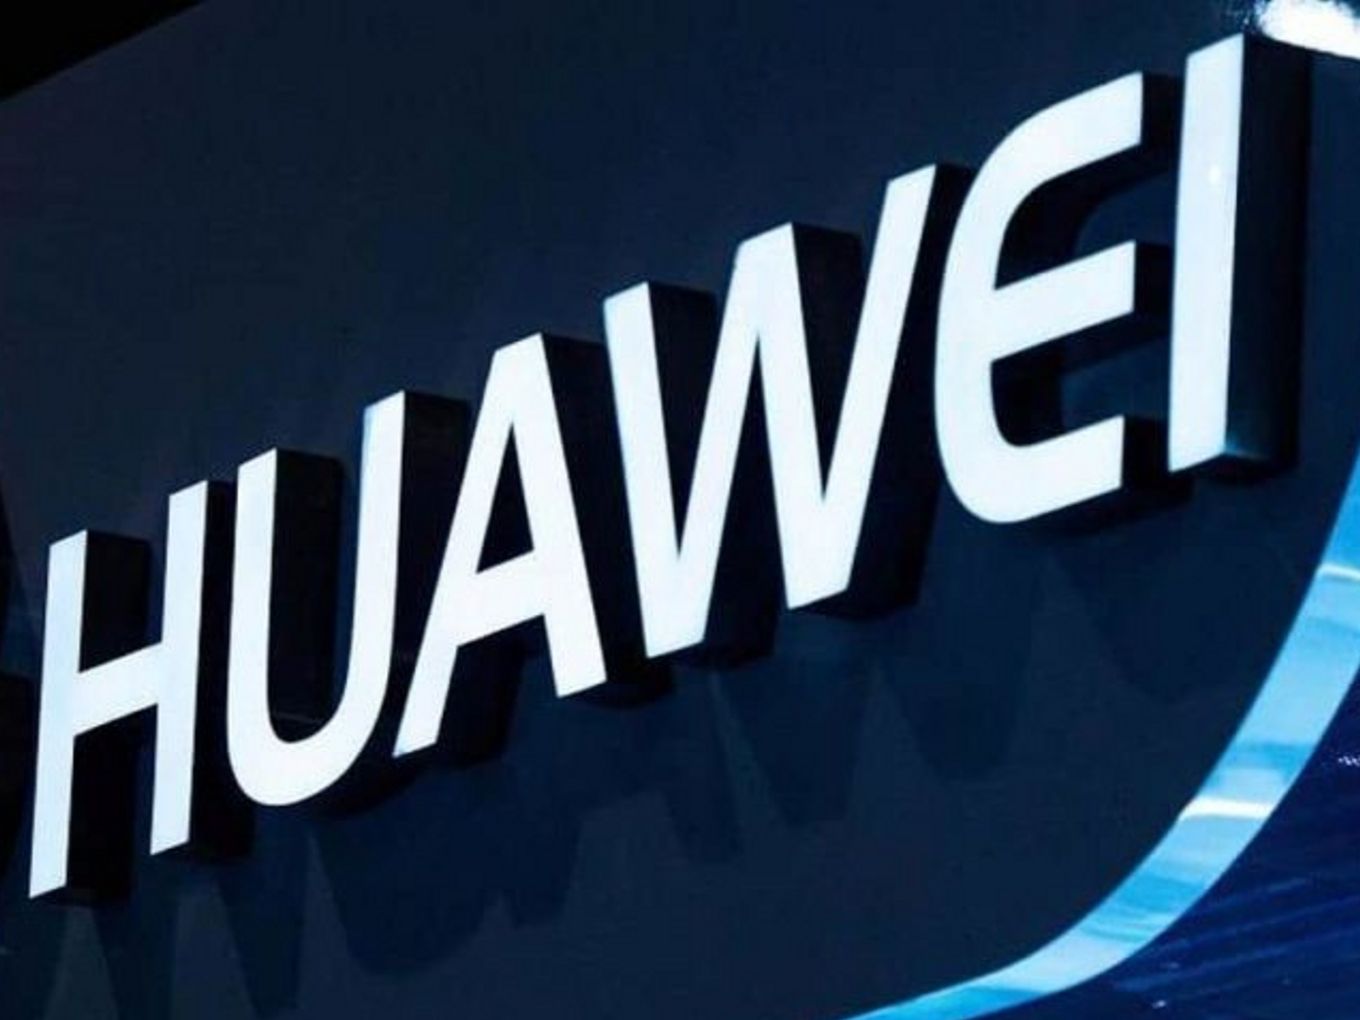 IMC's Invite To Huawei Doesn’t Confirm Its 5G Trial